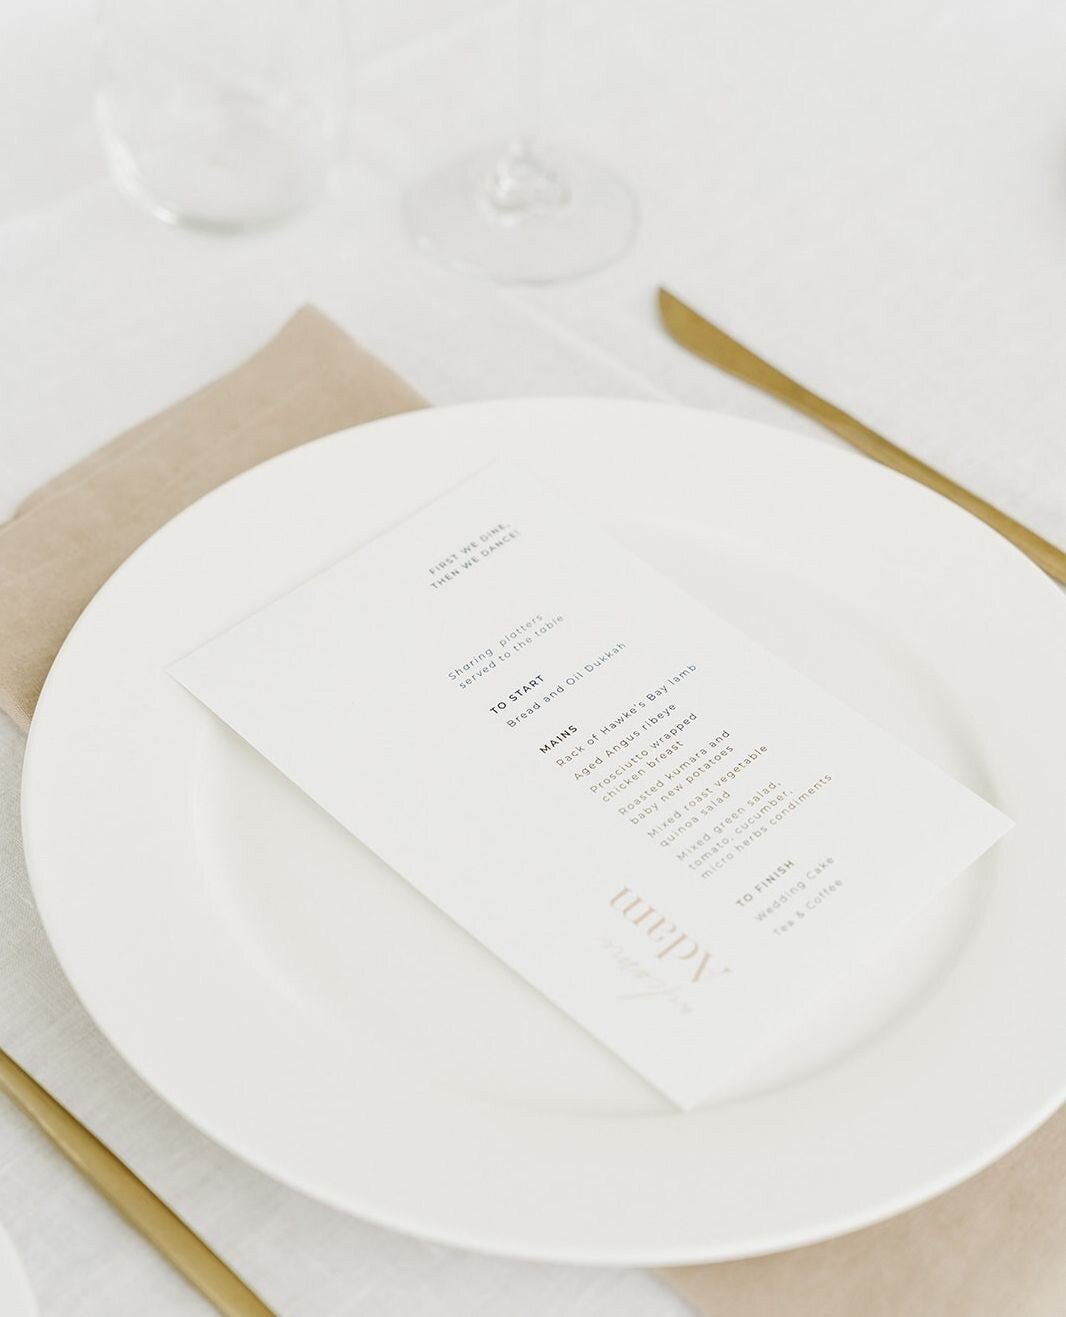 First we dine, then we dance x⁠
⁠
Modern, fresh &amp; elegant dinner menus in a colour palette of whites &amp; warm neutrals for the lovely Abbey &amp; Matt.⁠
⁠
Photographer @moments_and_waves_photography⁠
Wedding Planner - Best Day Ever⁠
Venue @bayl